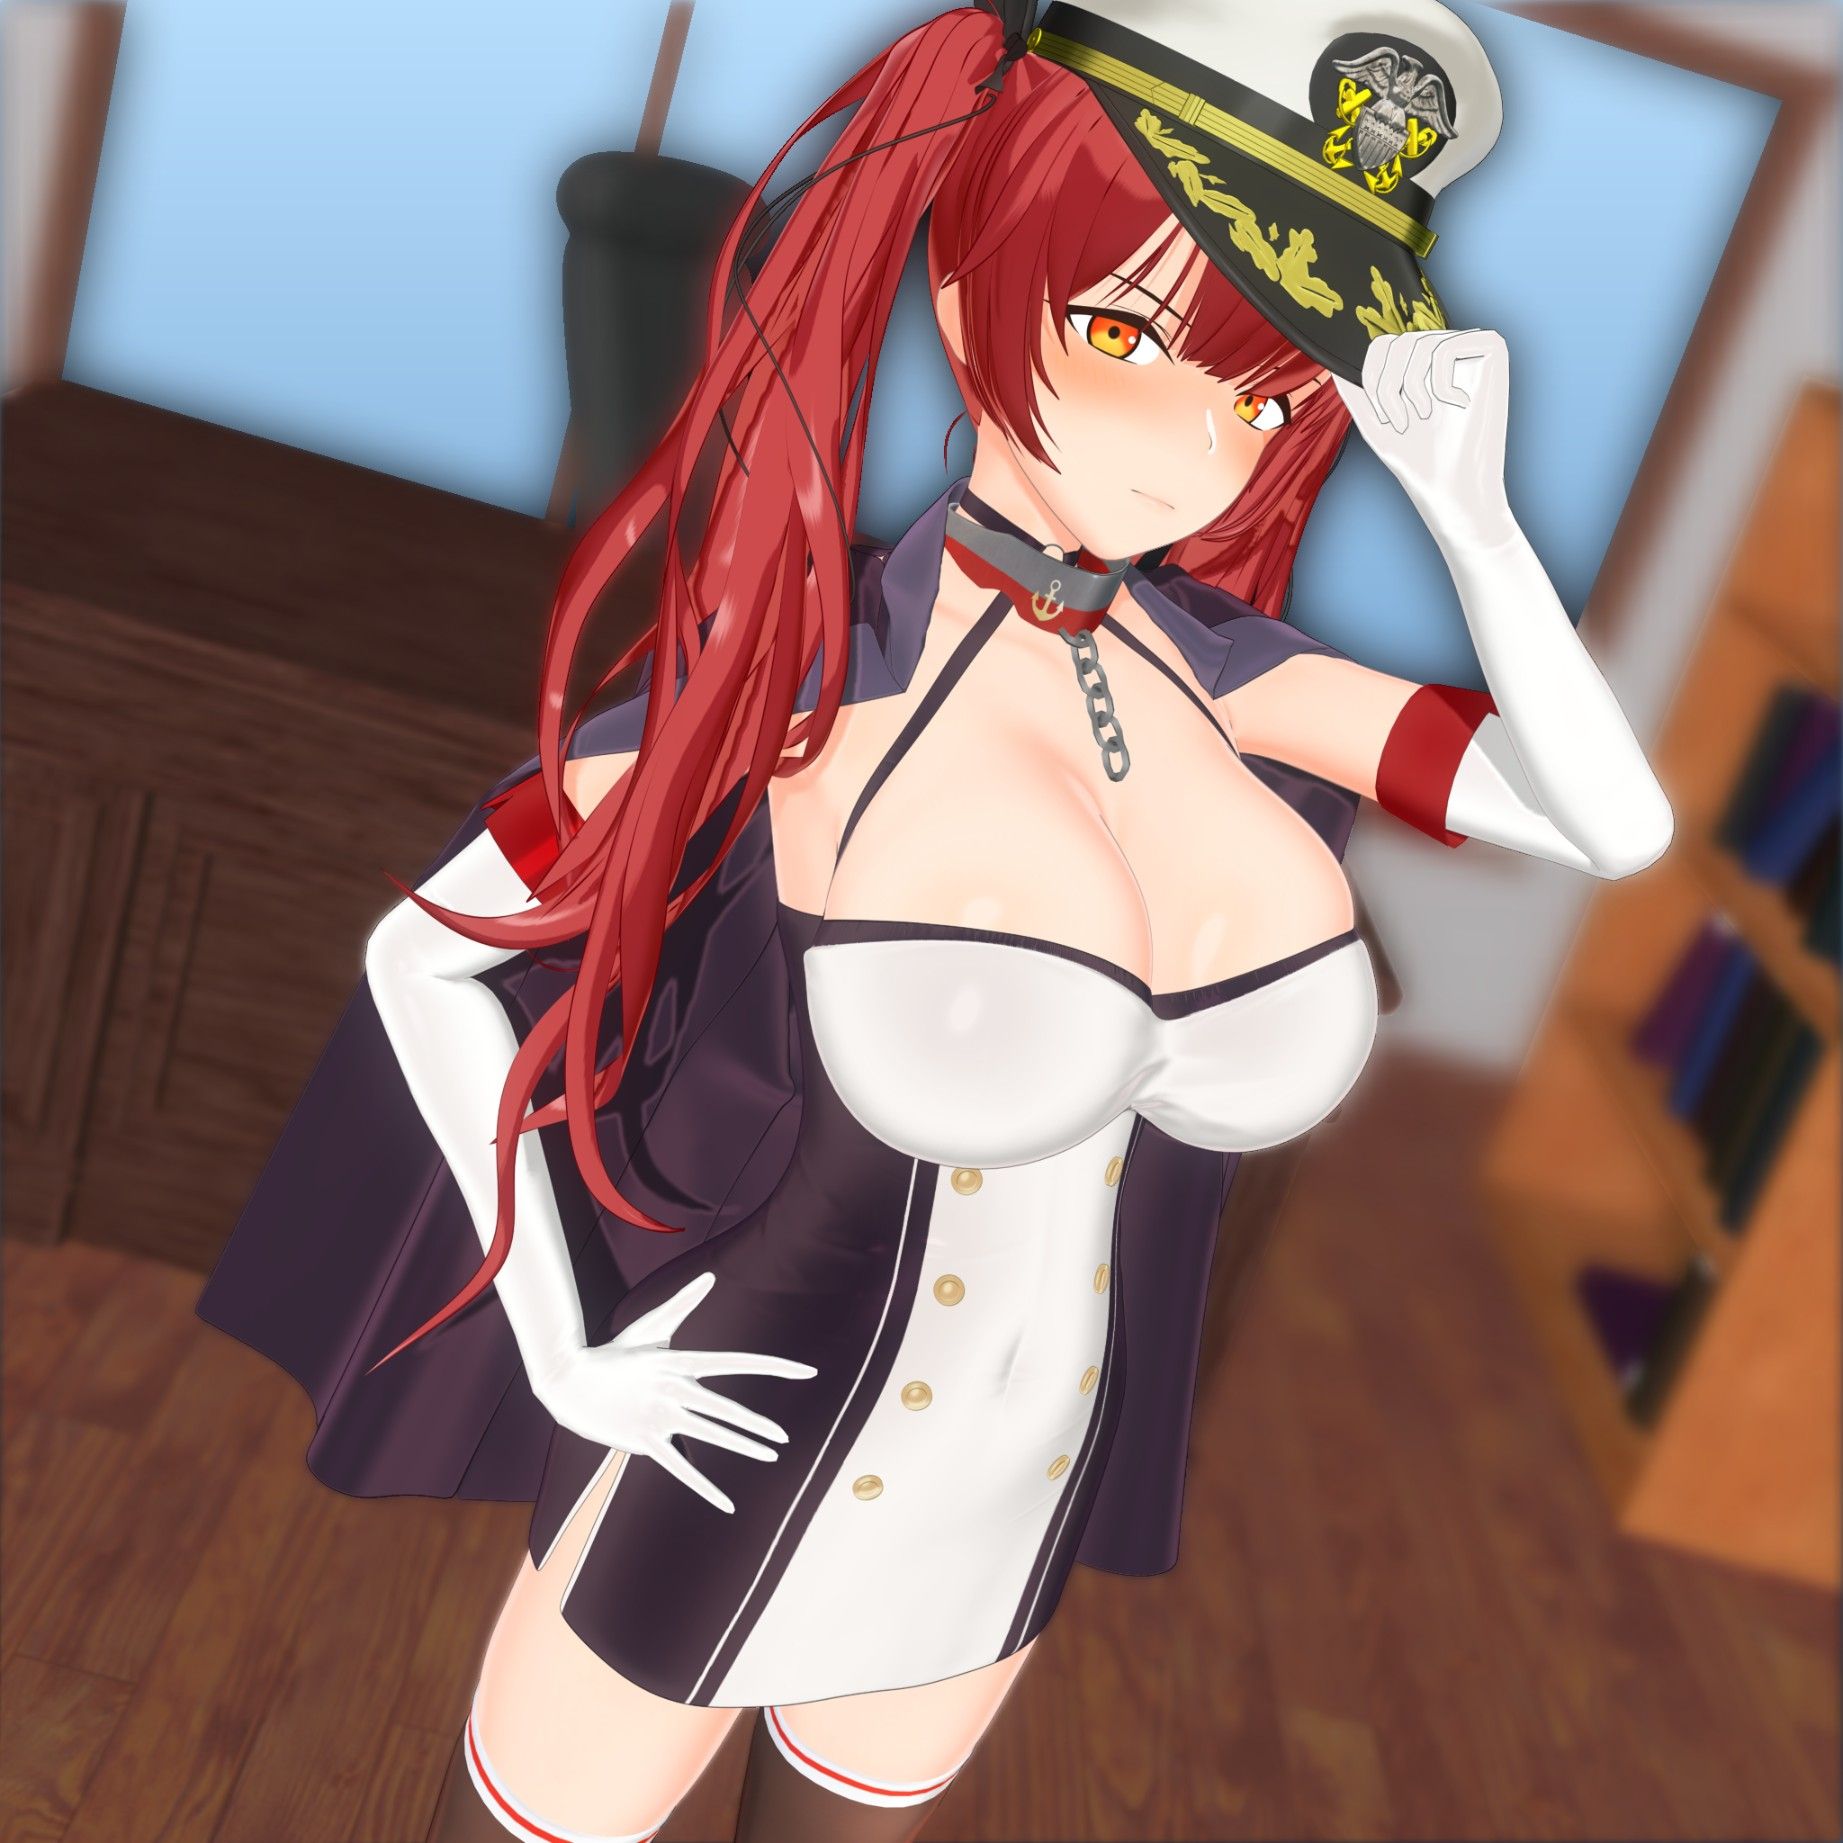 【With images】St. Louis is a real ban on dark customs www (Azur Lane) 25